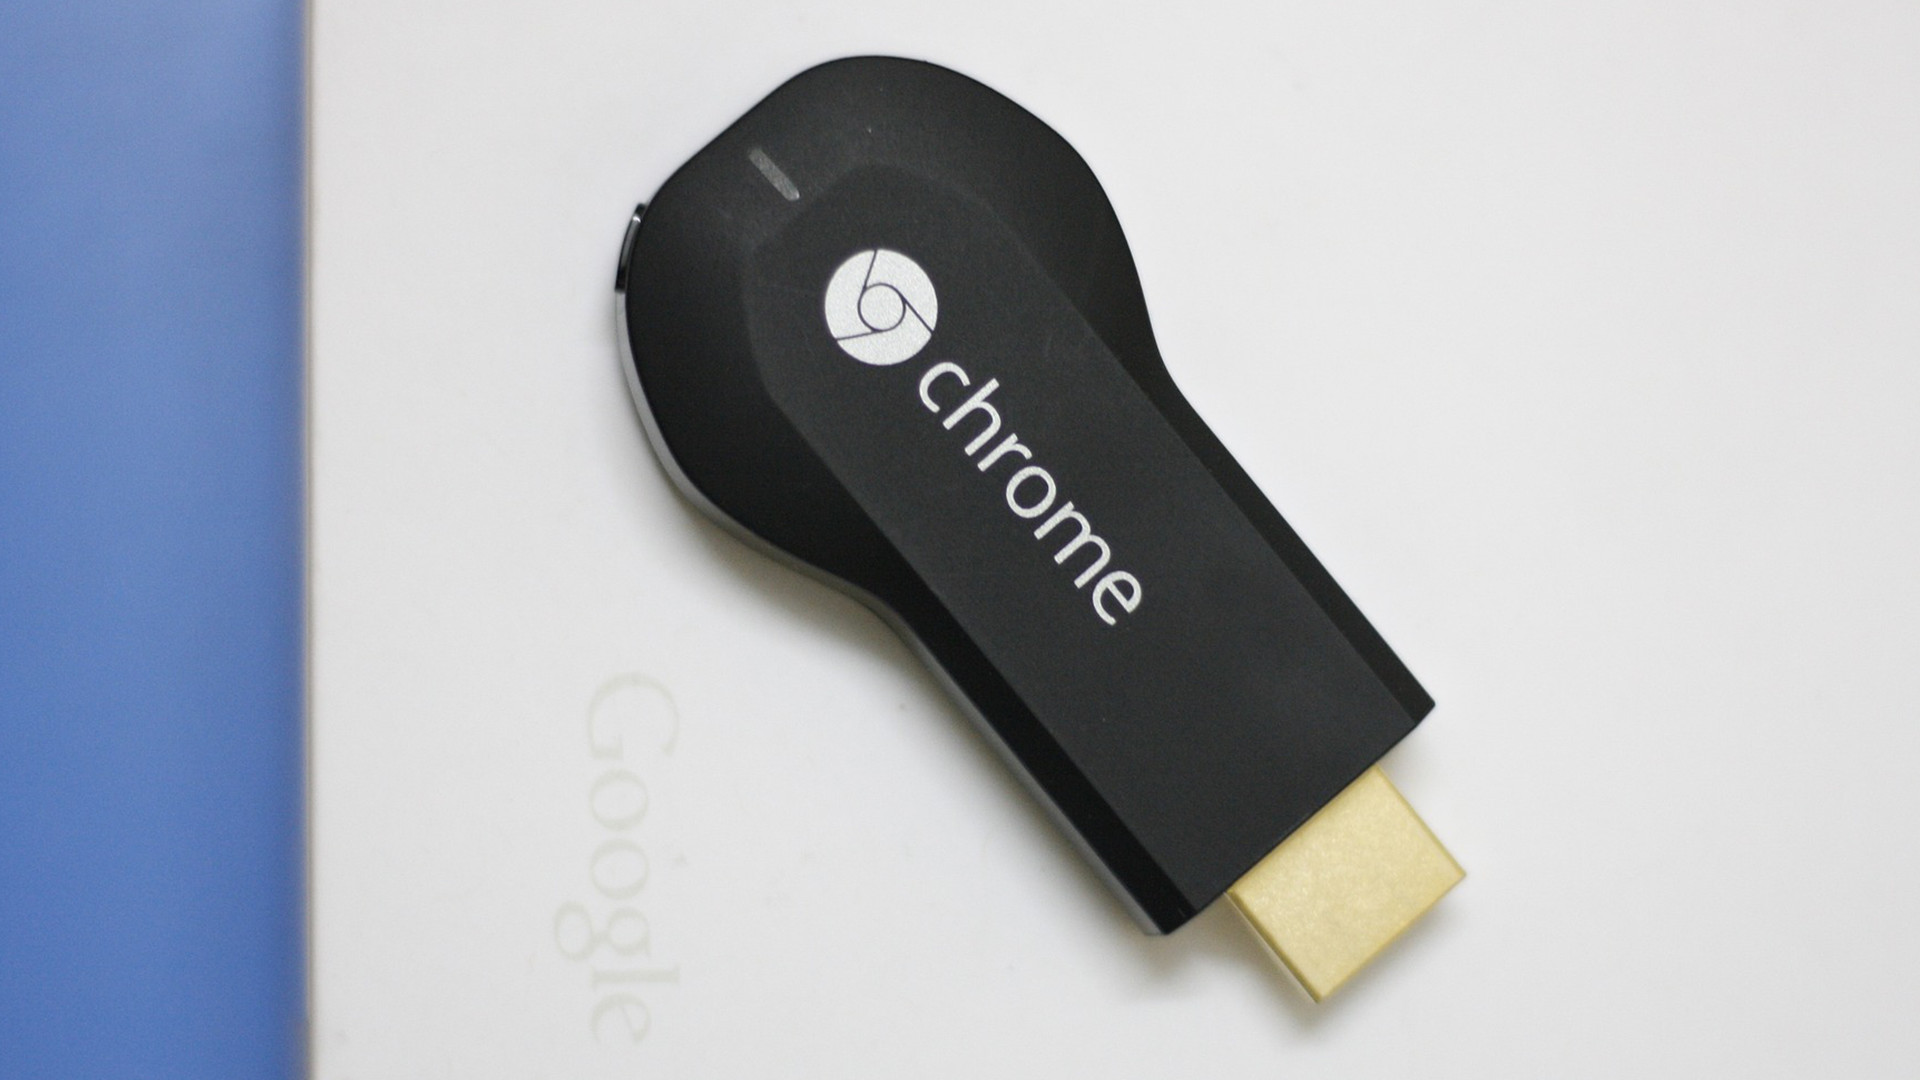 Google just removed one of Chromecast's most useful features